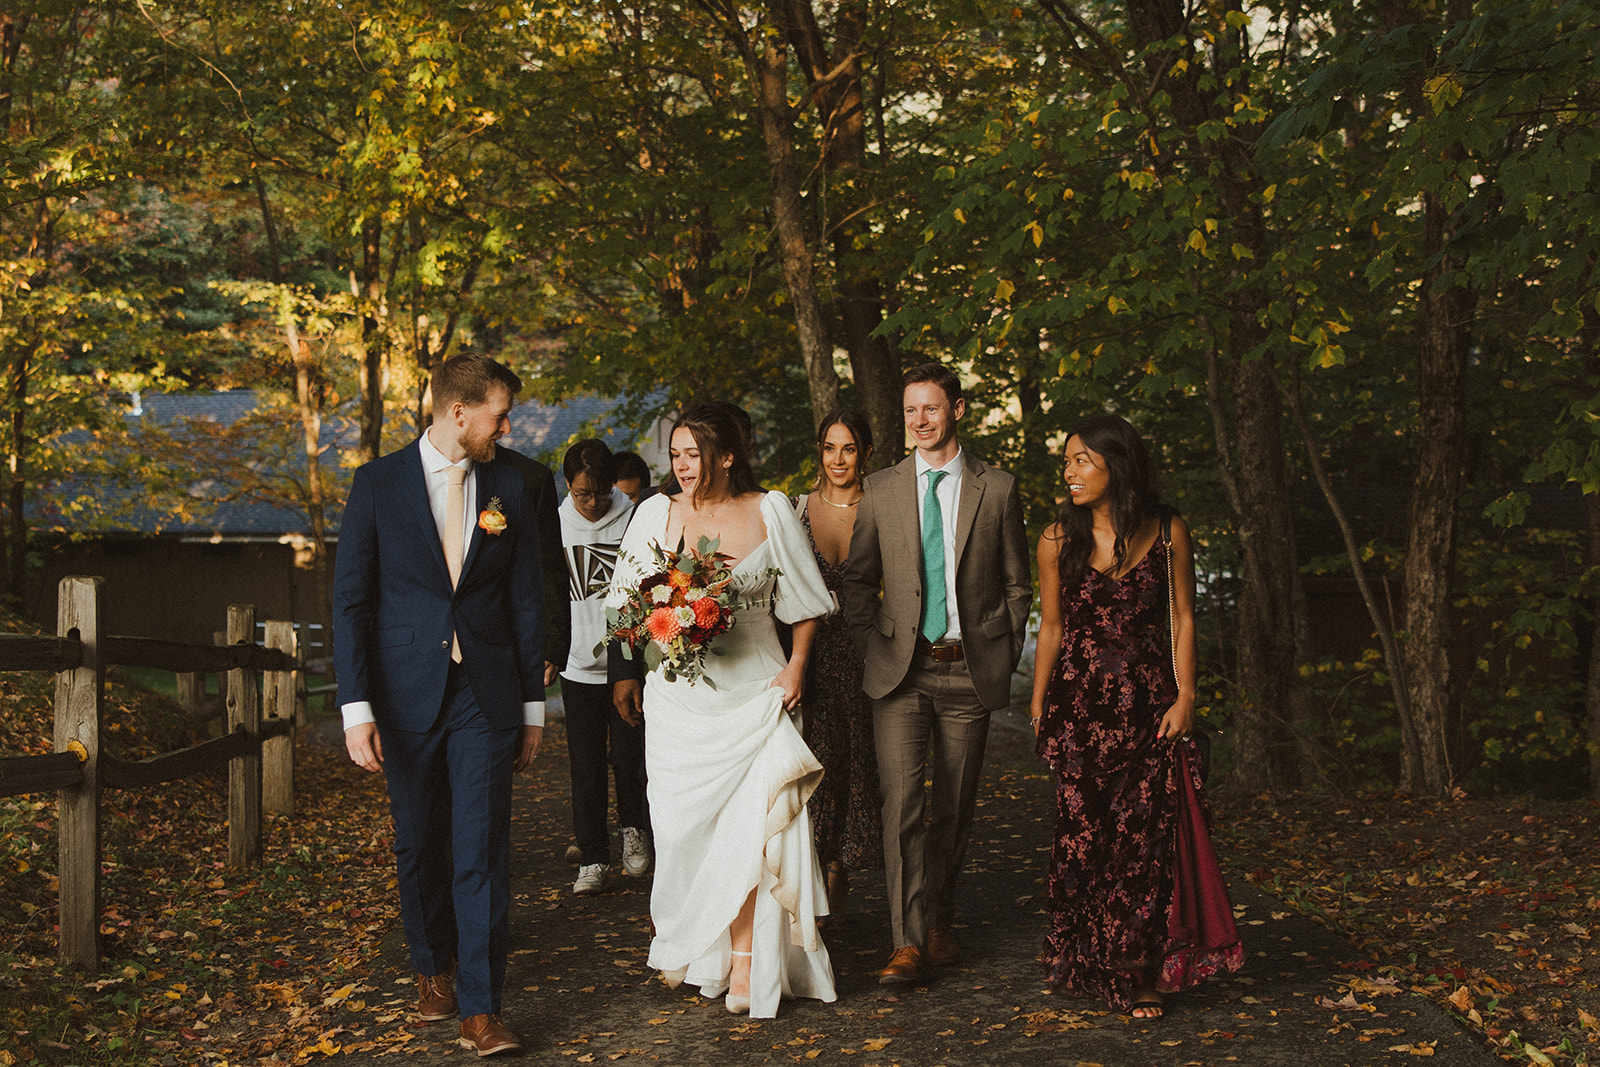 family walks with the bride and groom after their stunning Echo lake elopement ceremony